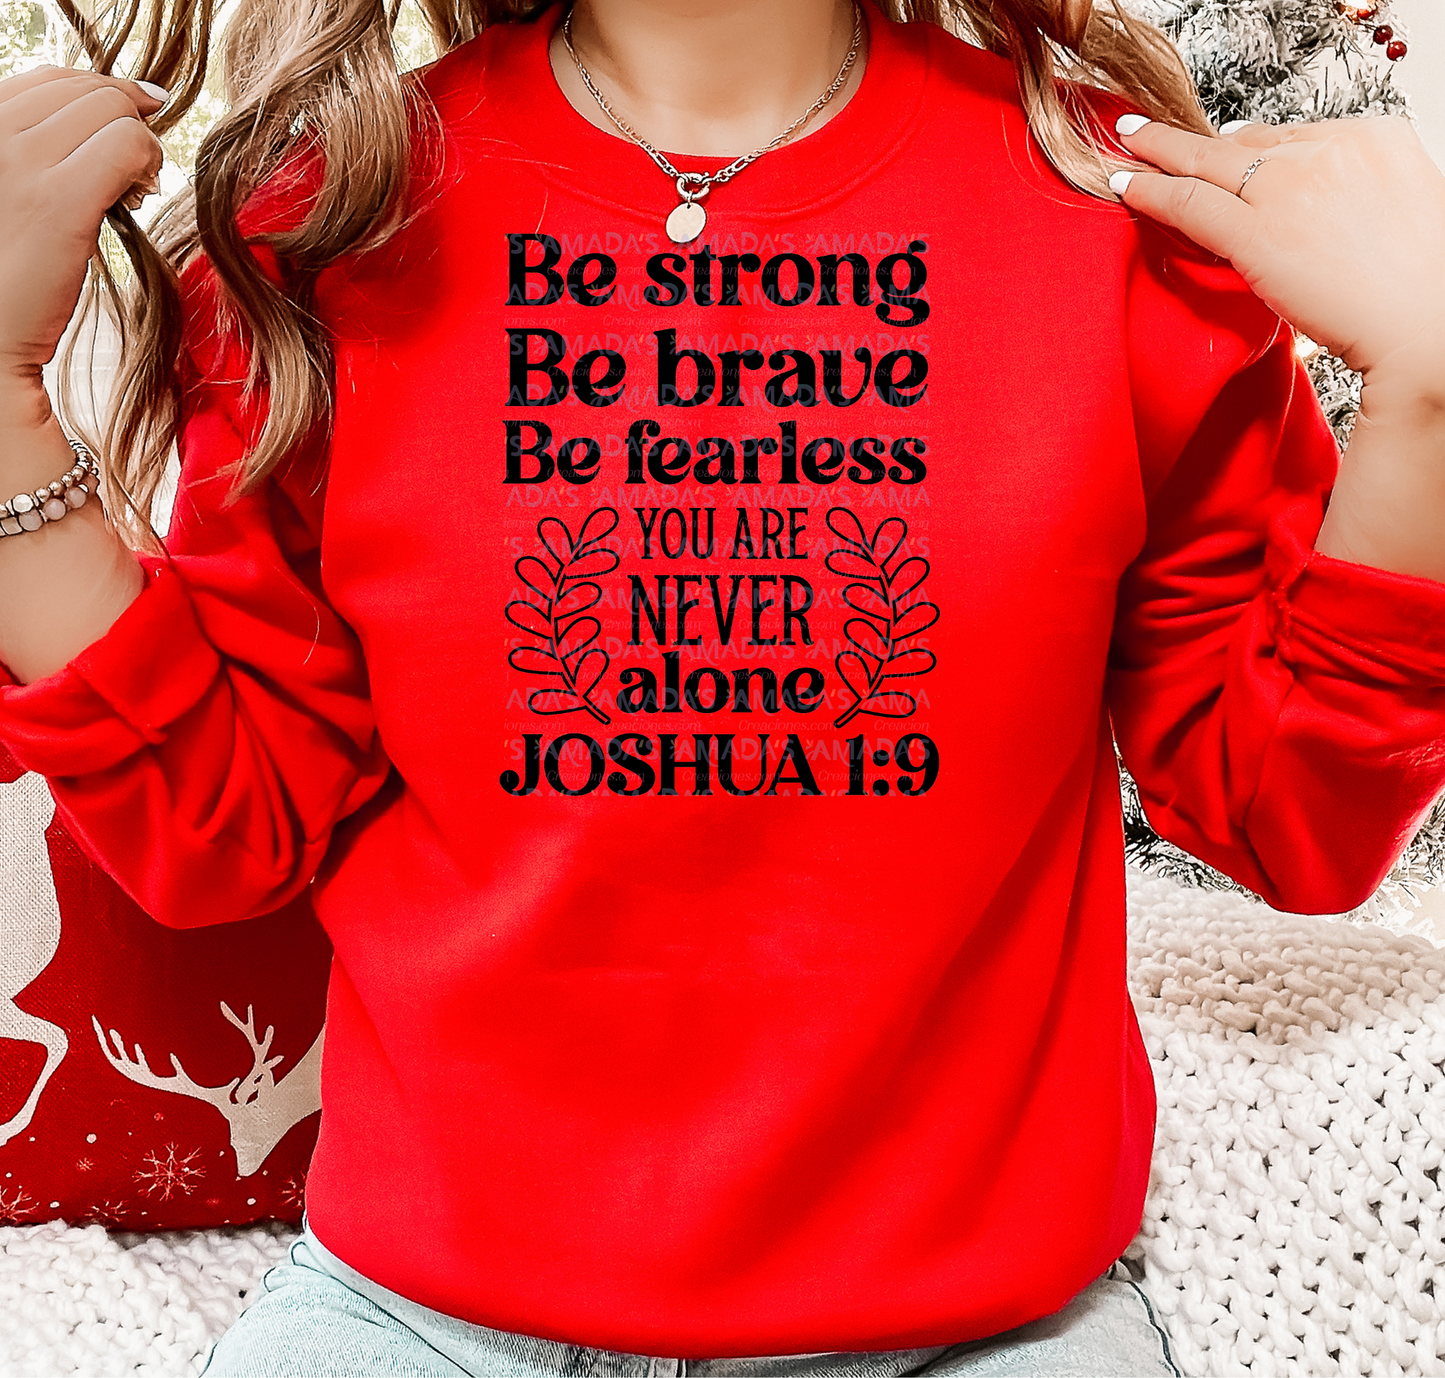 BE STRONG BE BRAVE BE FEARLESS YOU ARE NEVER ALONE COLOR BLACK #25 (Screen print transfers)